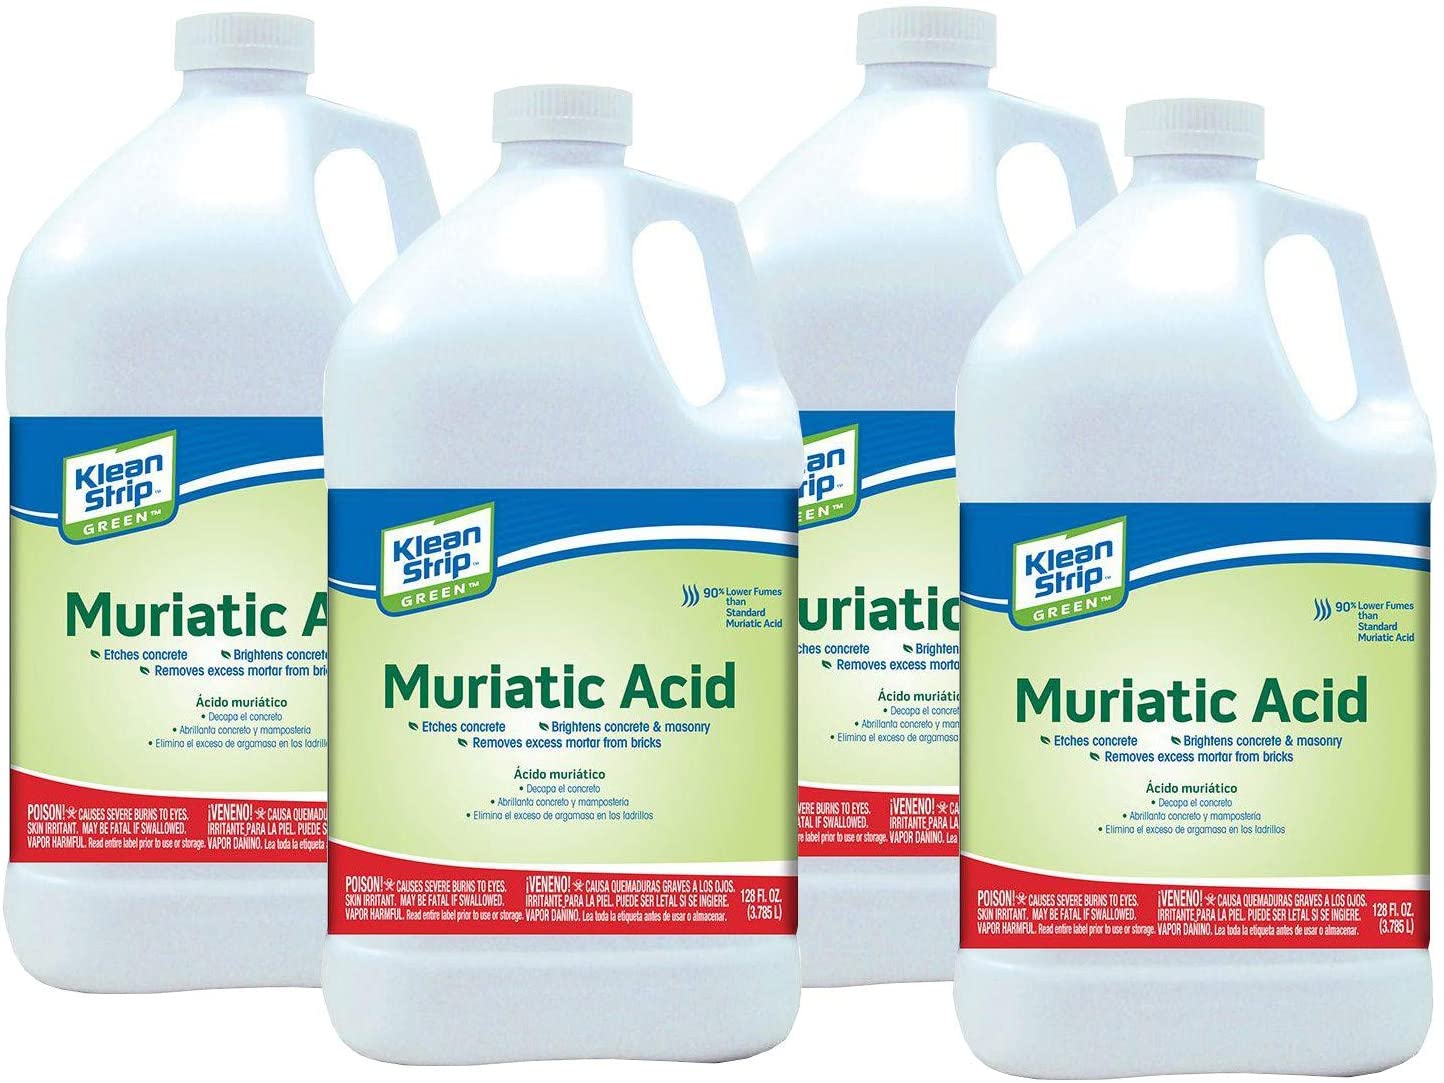 Muriatic Acid in Swimming Pools: Uses, Applications, and Best Practices